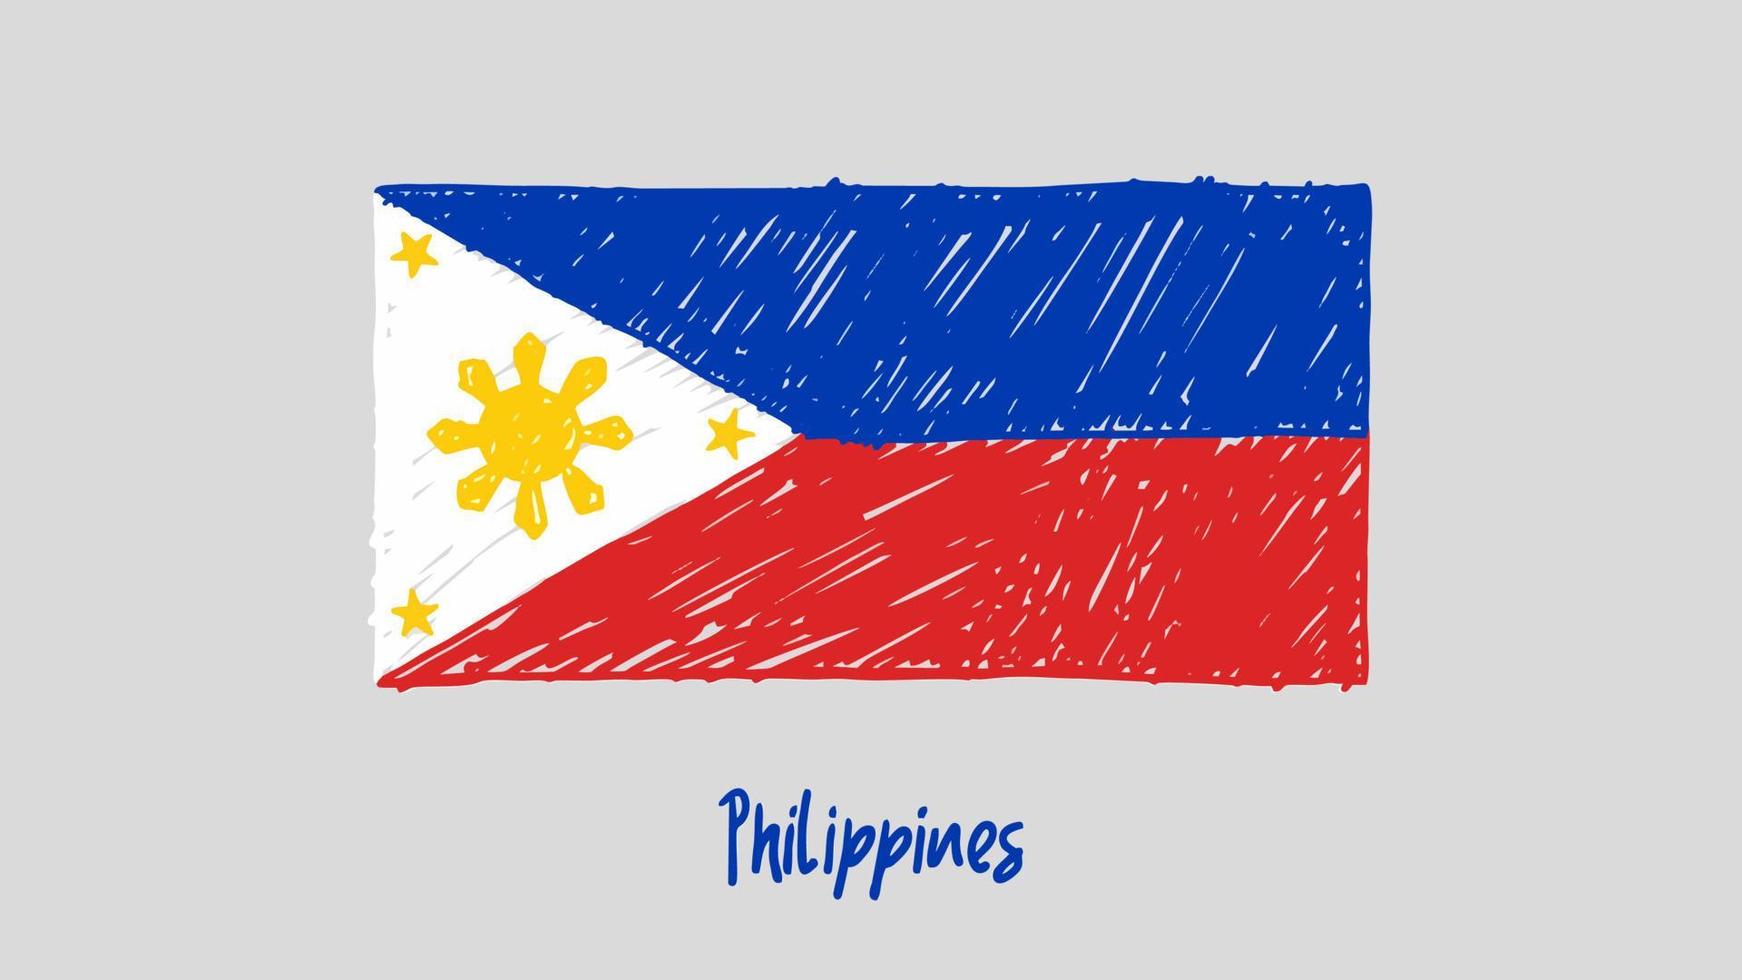 Philippines National Country Flag Marker or Pencil Sketch Illustration Vector